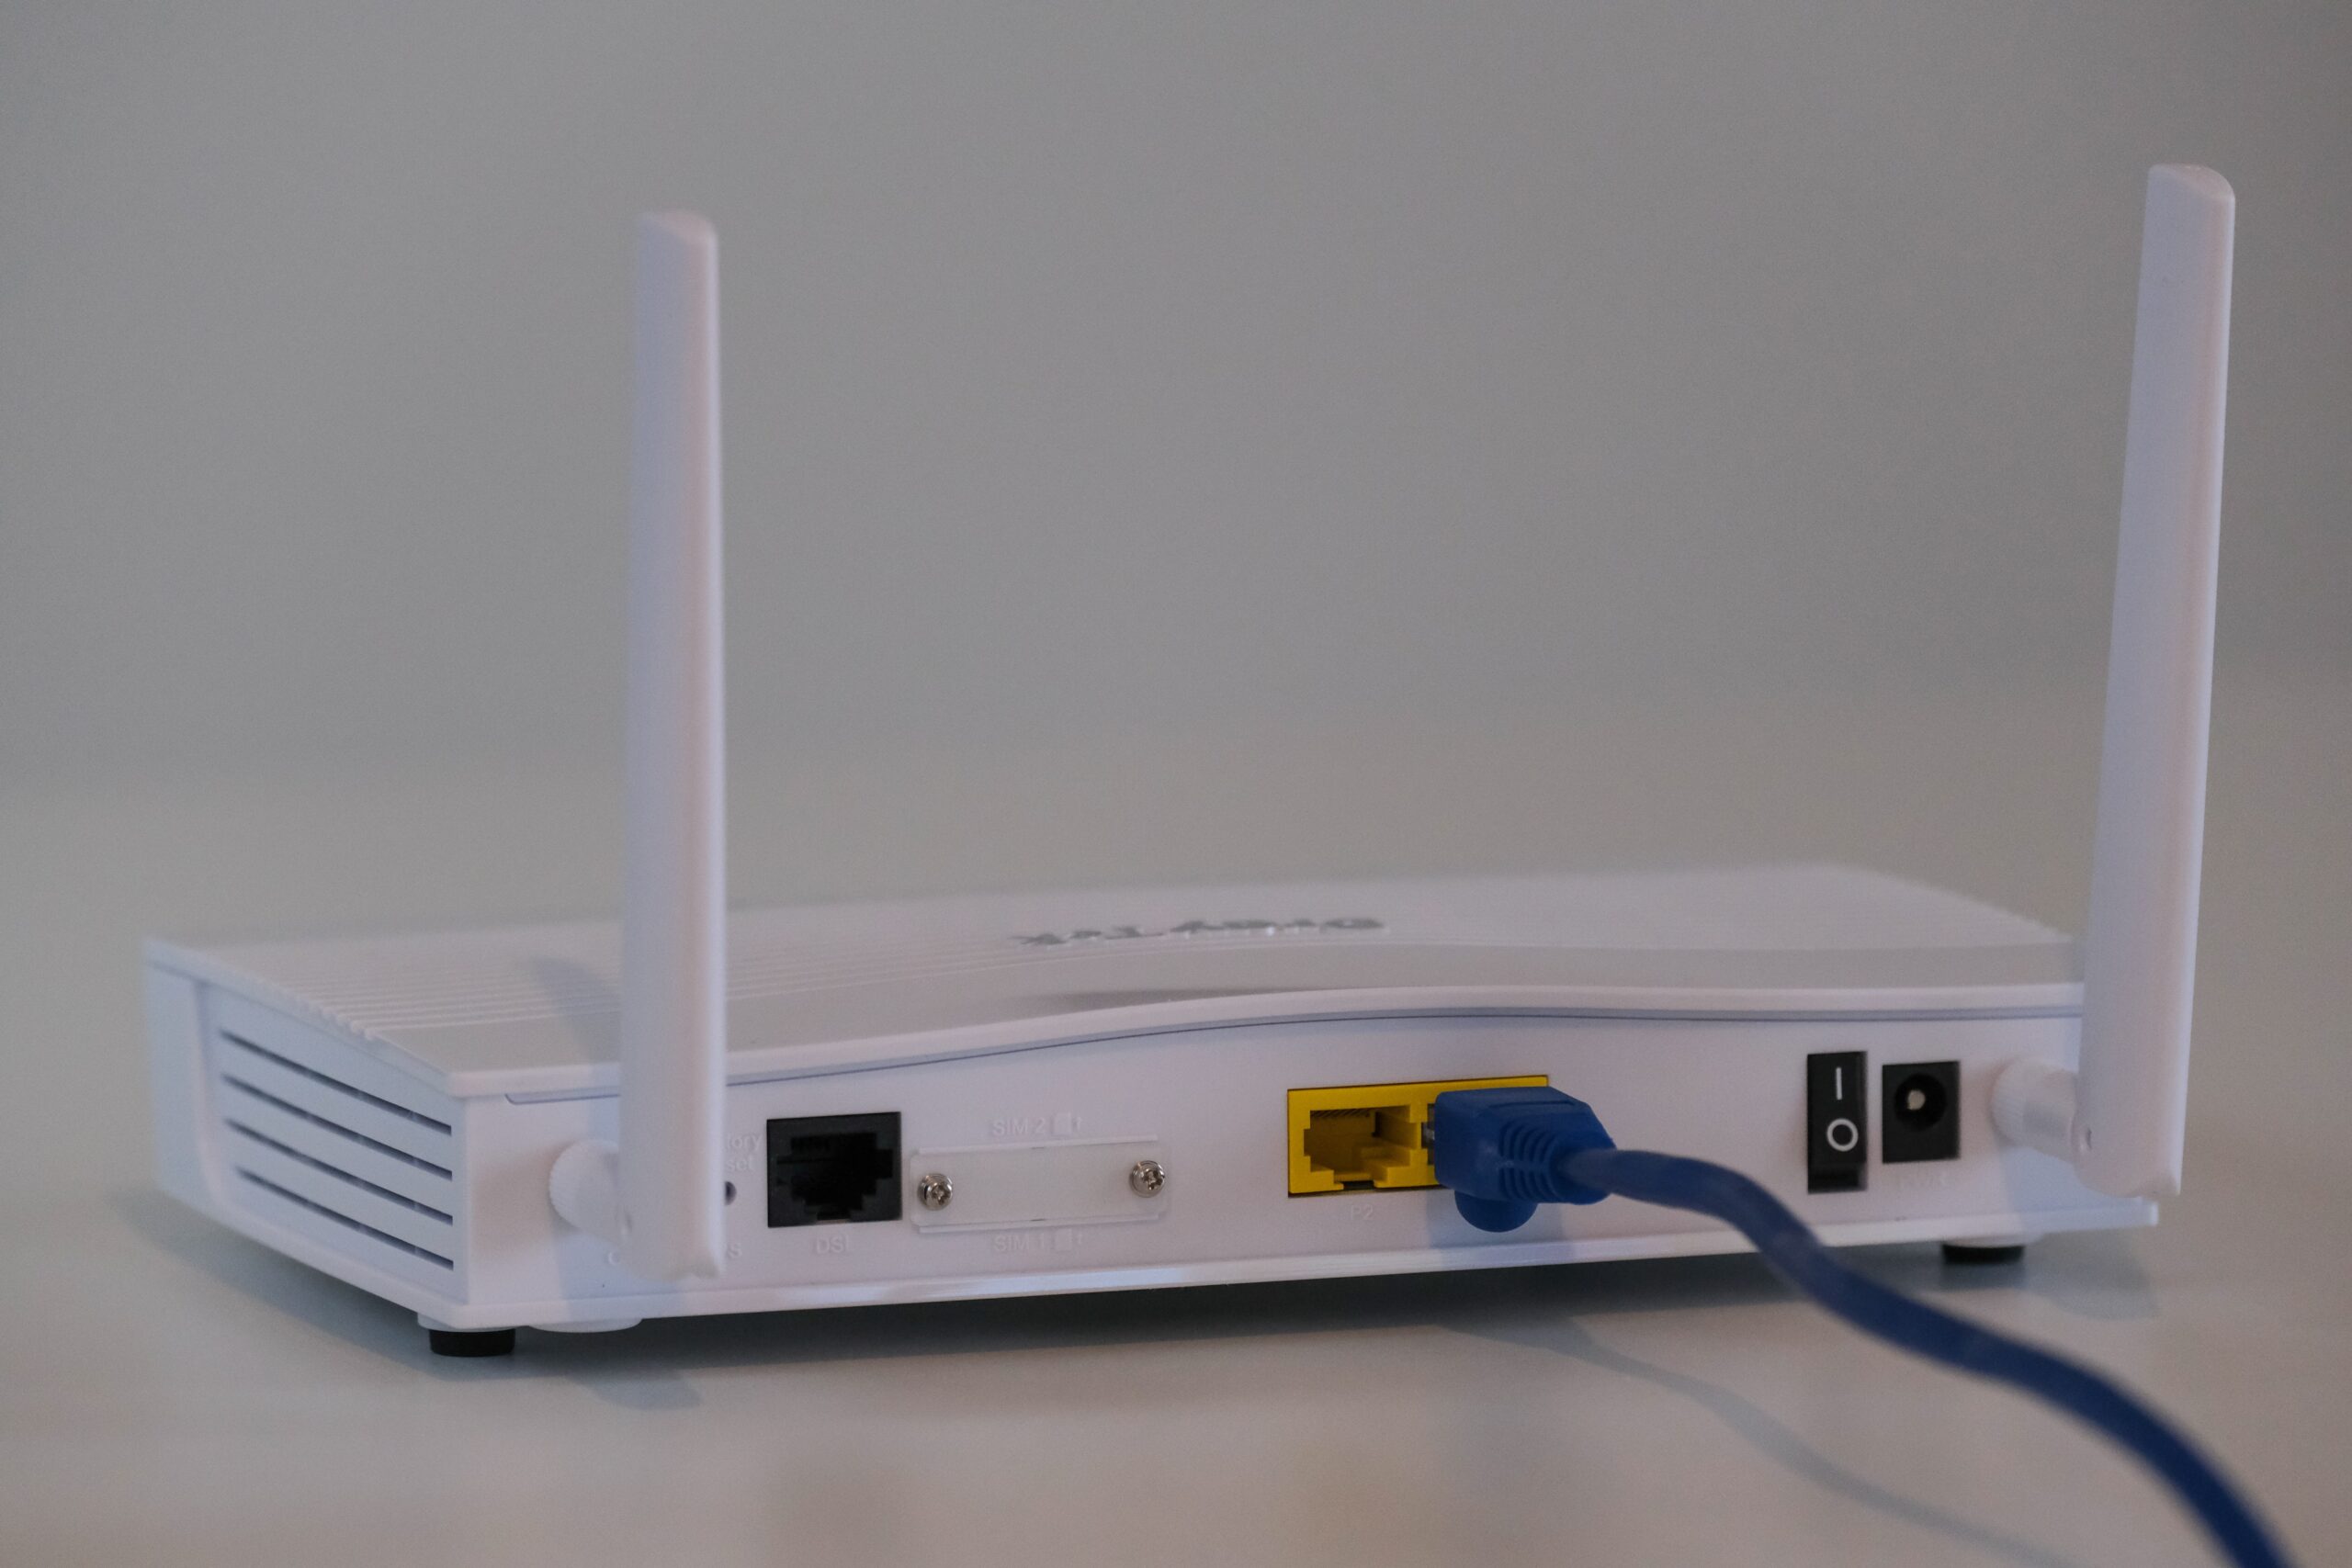 Do You Need An Ethernet Cable For Wi-Fi?